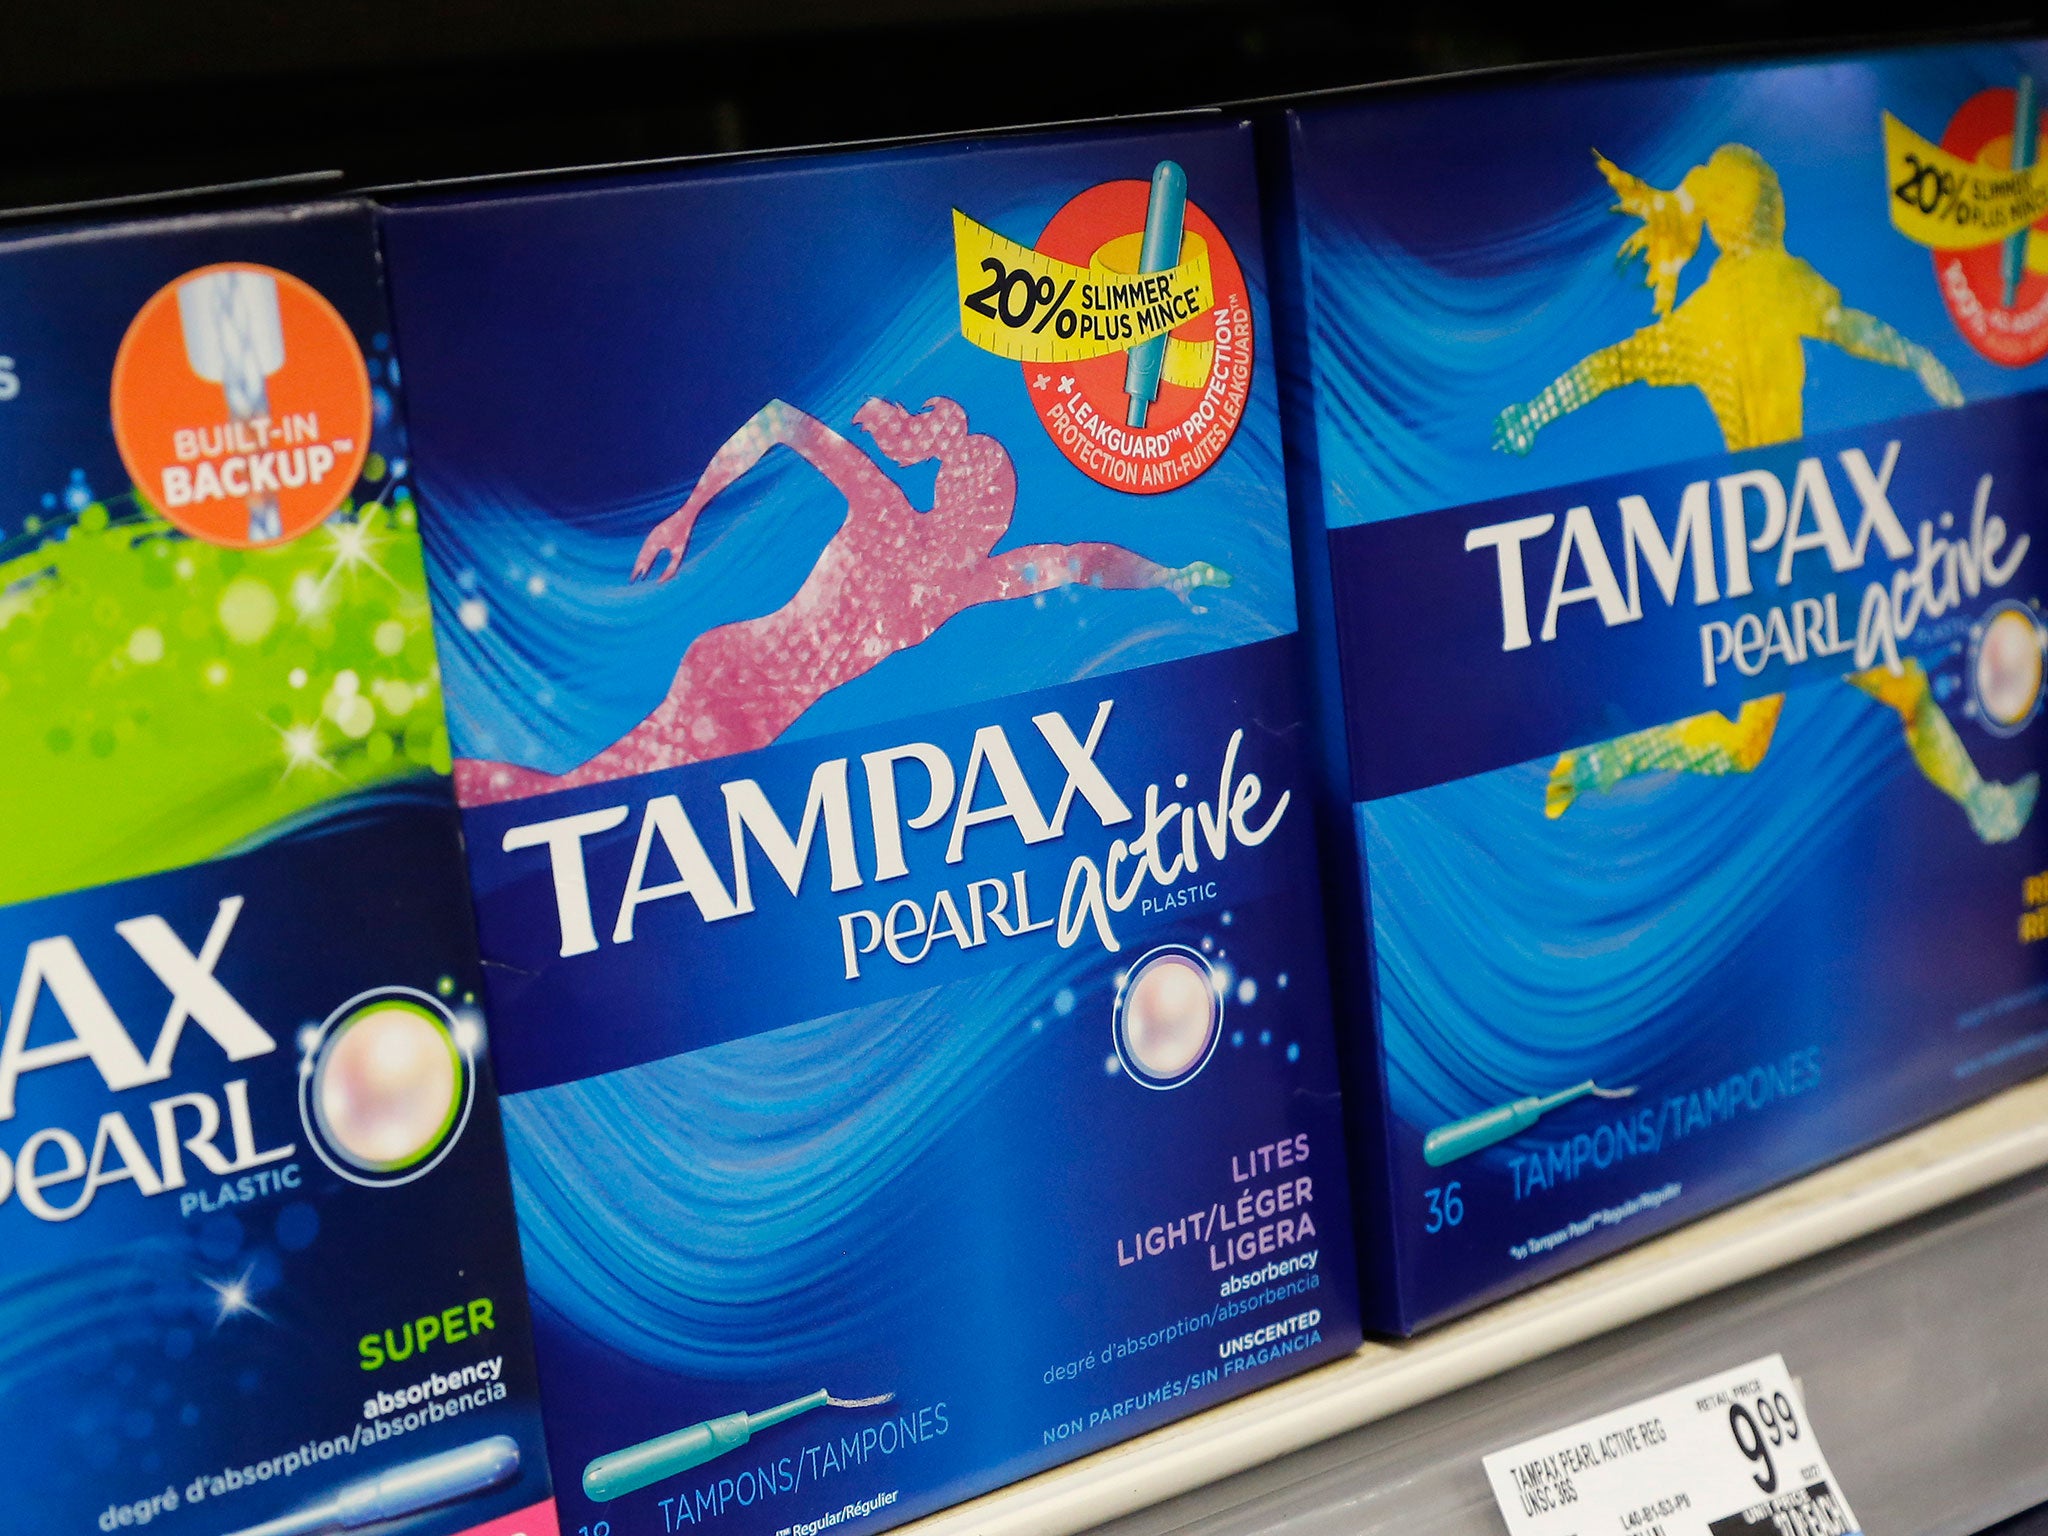 Brussels has said that it will allow zero tax on sanitary products